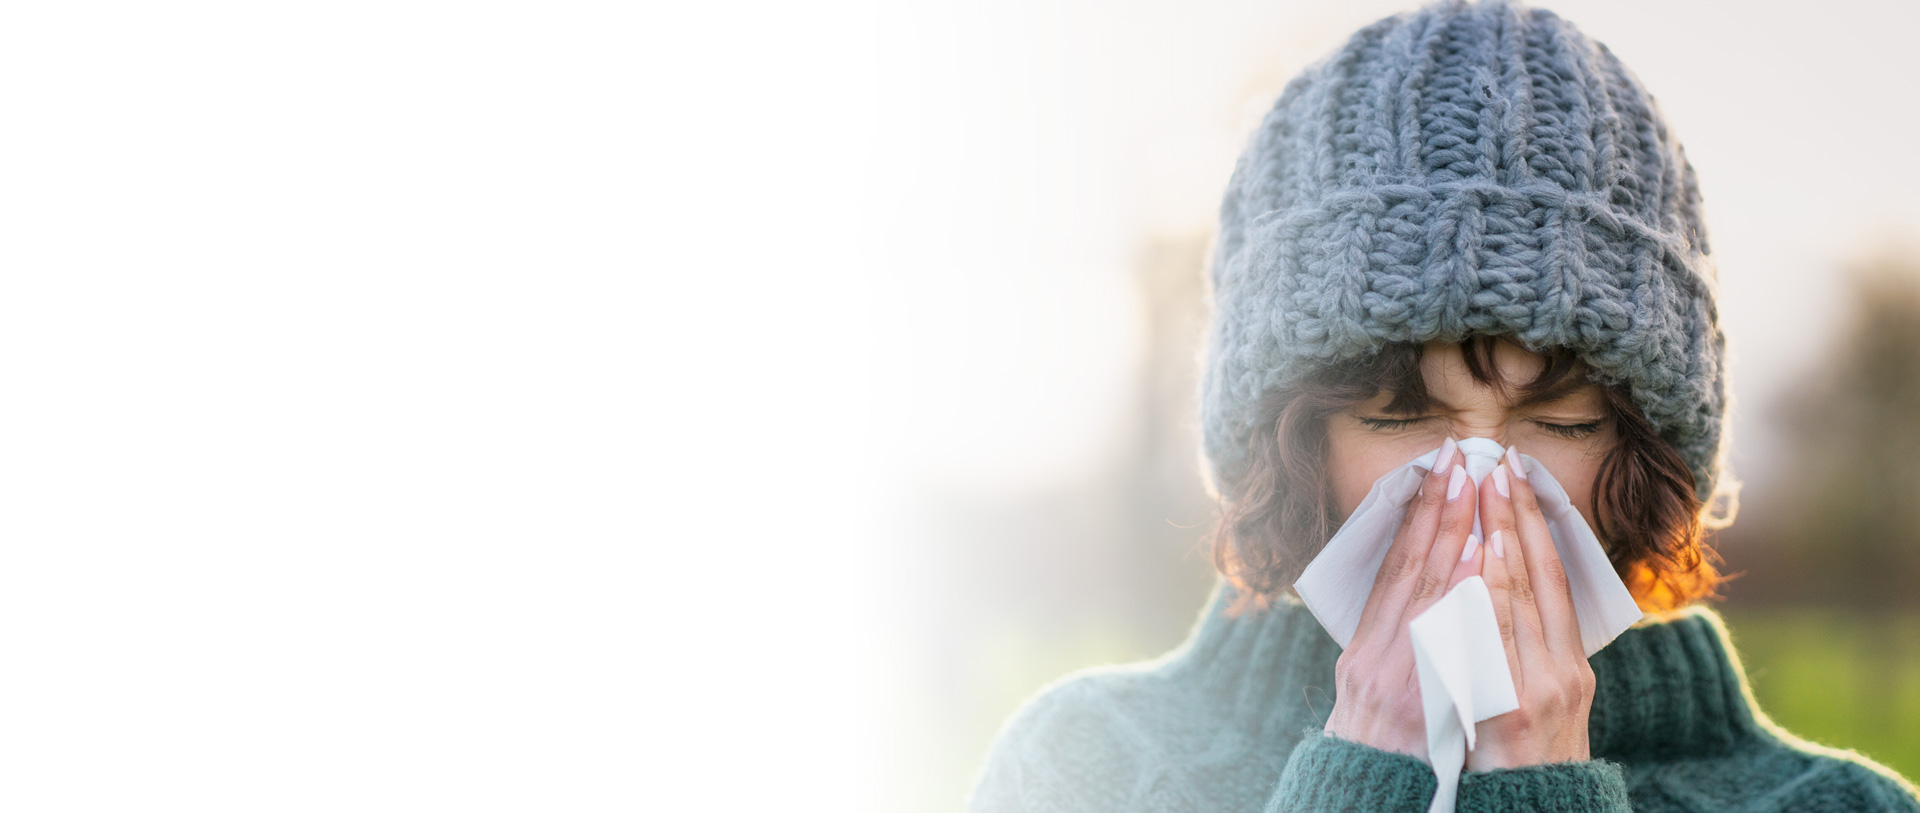 pictured: a woman wearing a knit beanie cap blows her nose